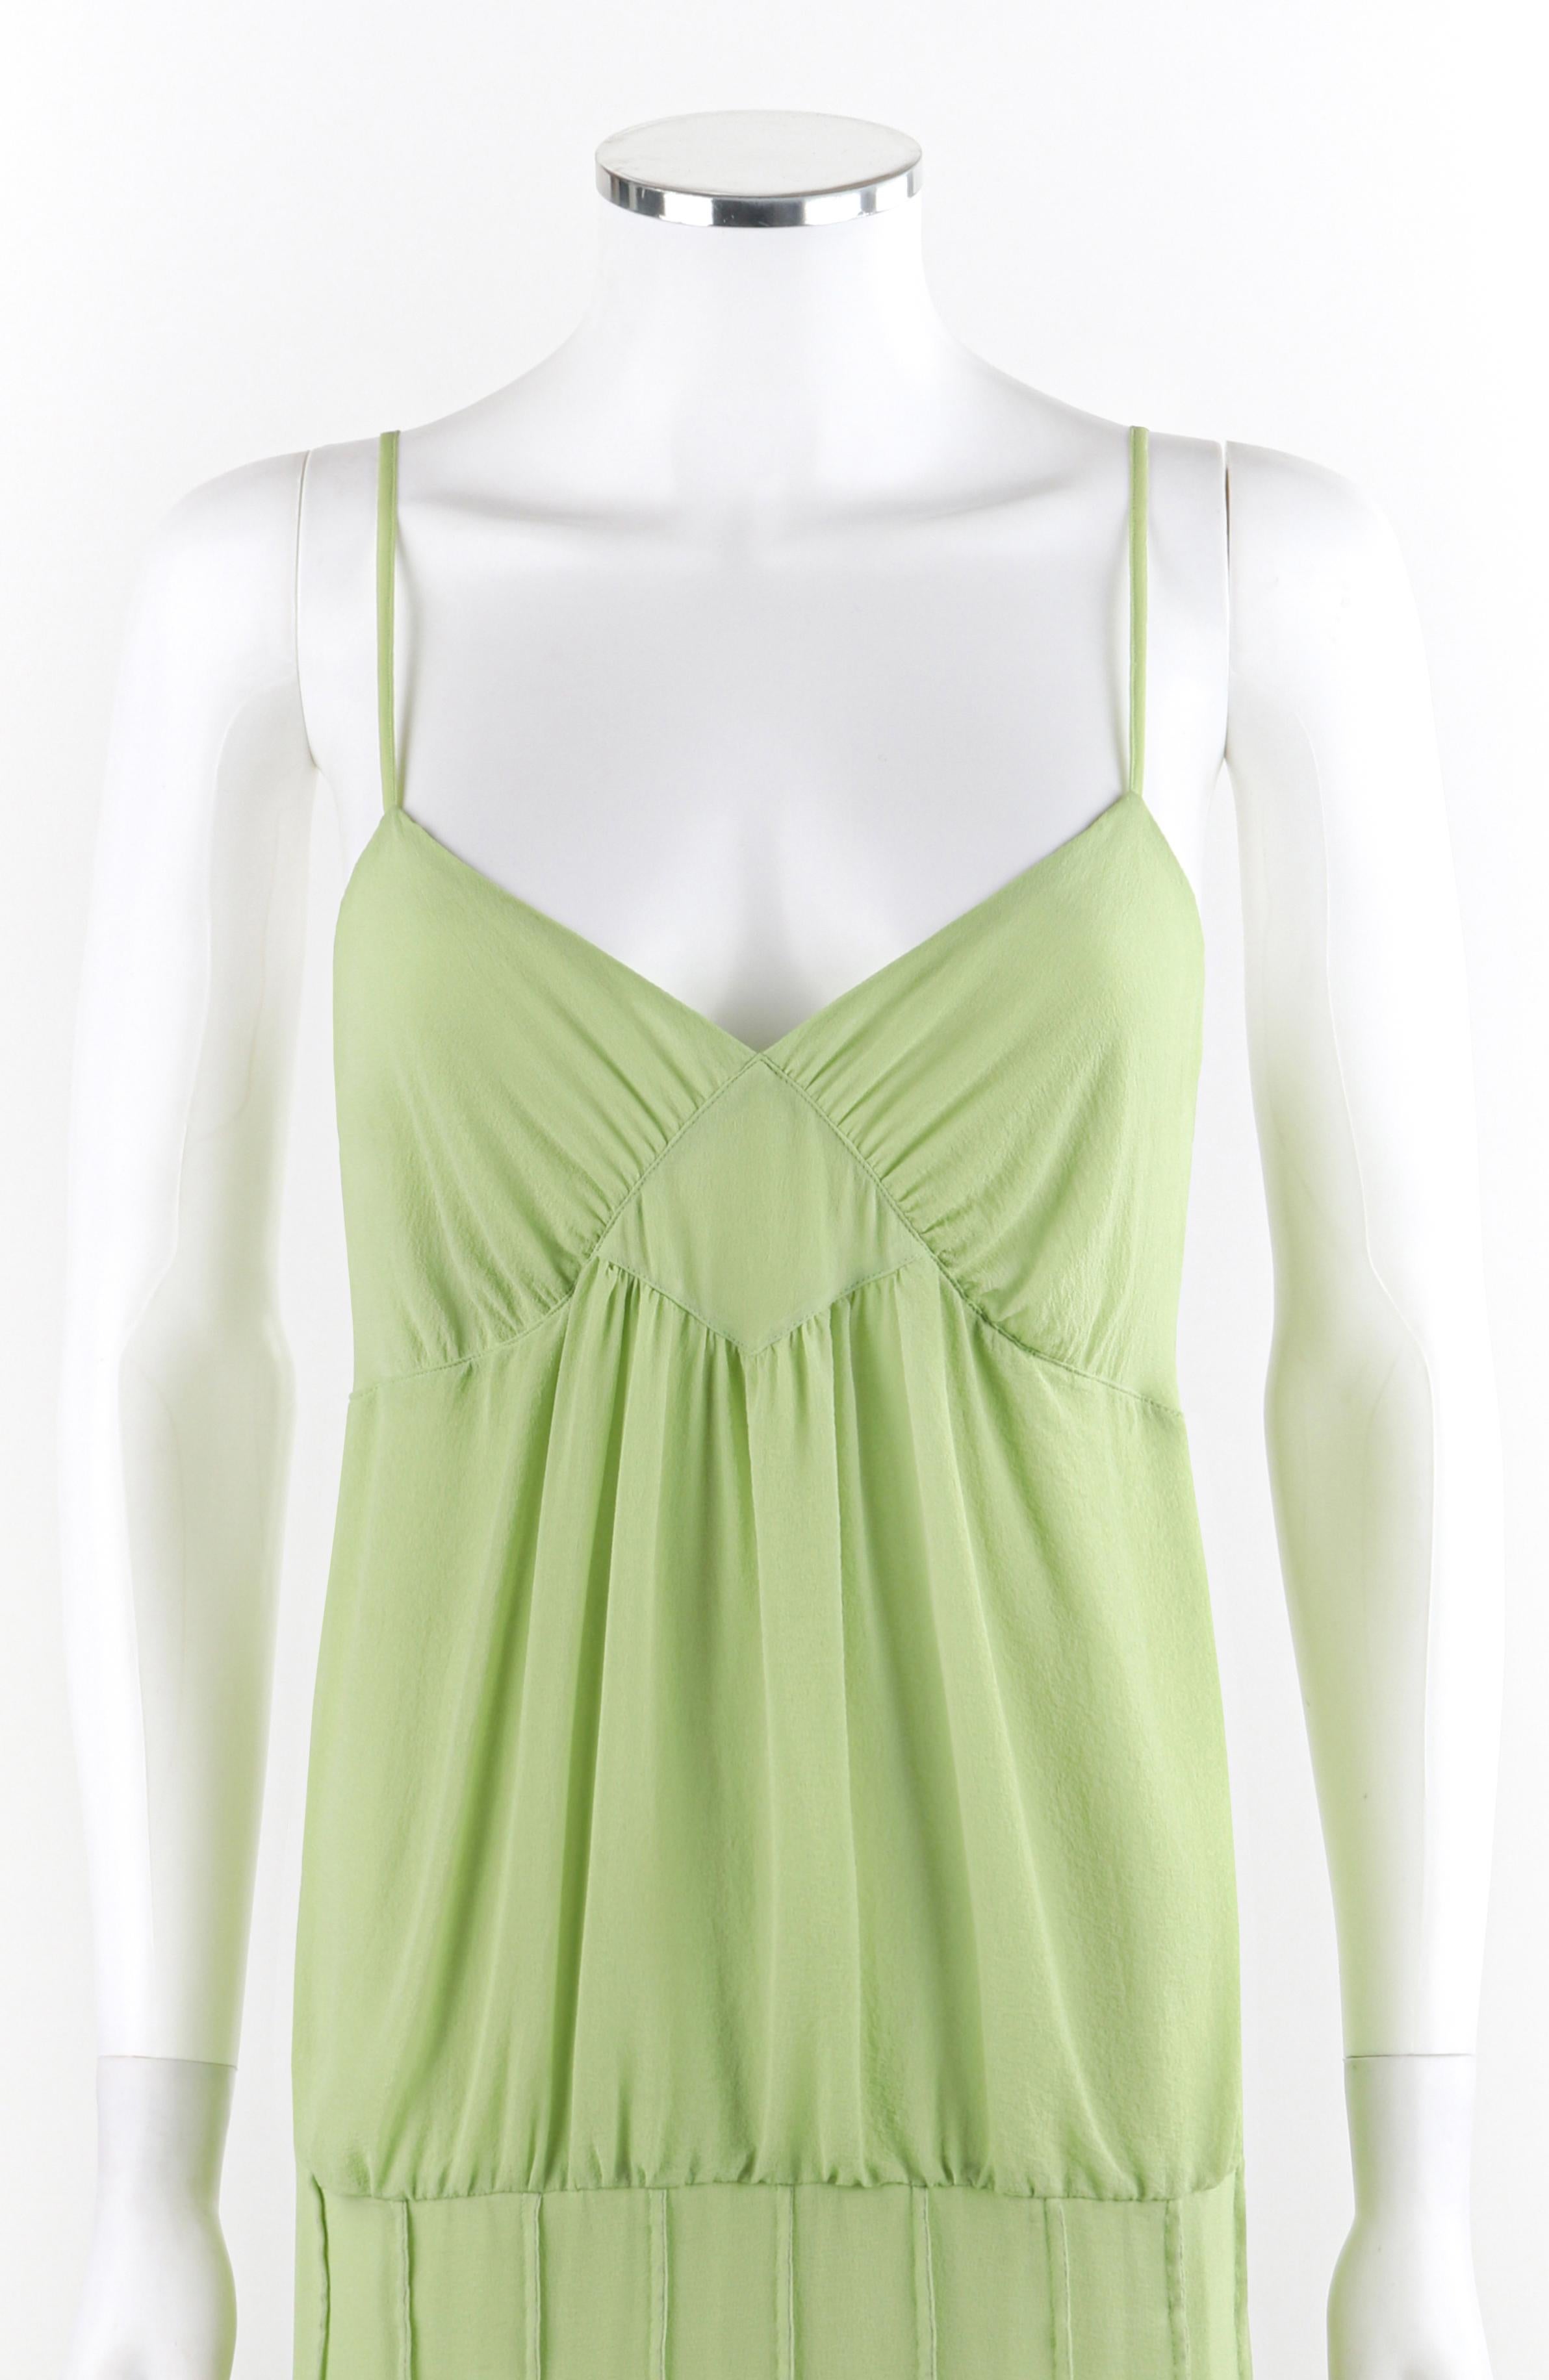 ALEXANDER MCQUEEN S/S 1996 Chartreuse Ruffled Tiered V-neck Pleated Sundress  In Fair Condition For Sale In Thiensville, WI